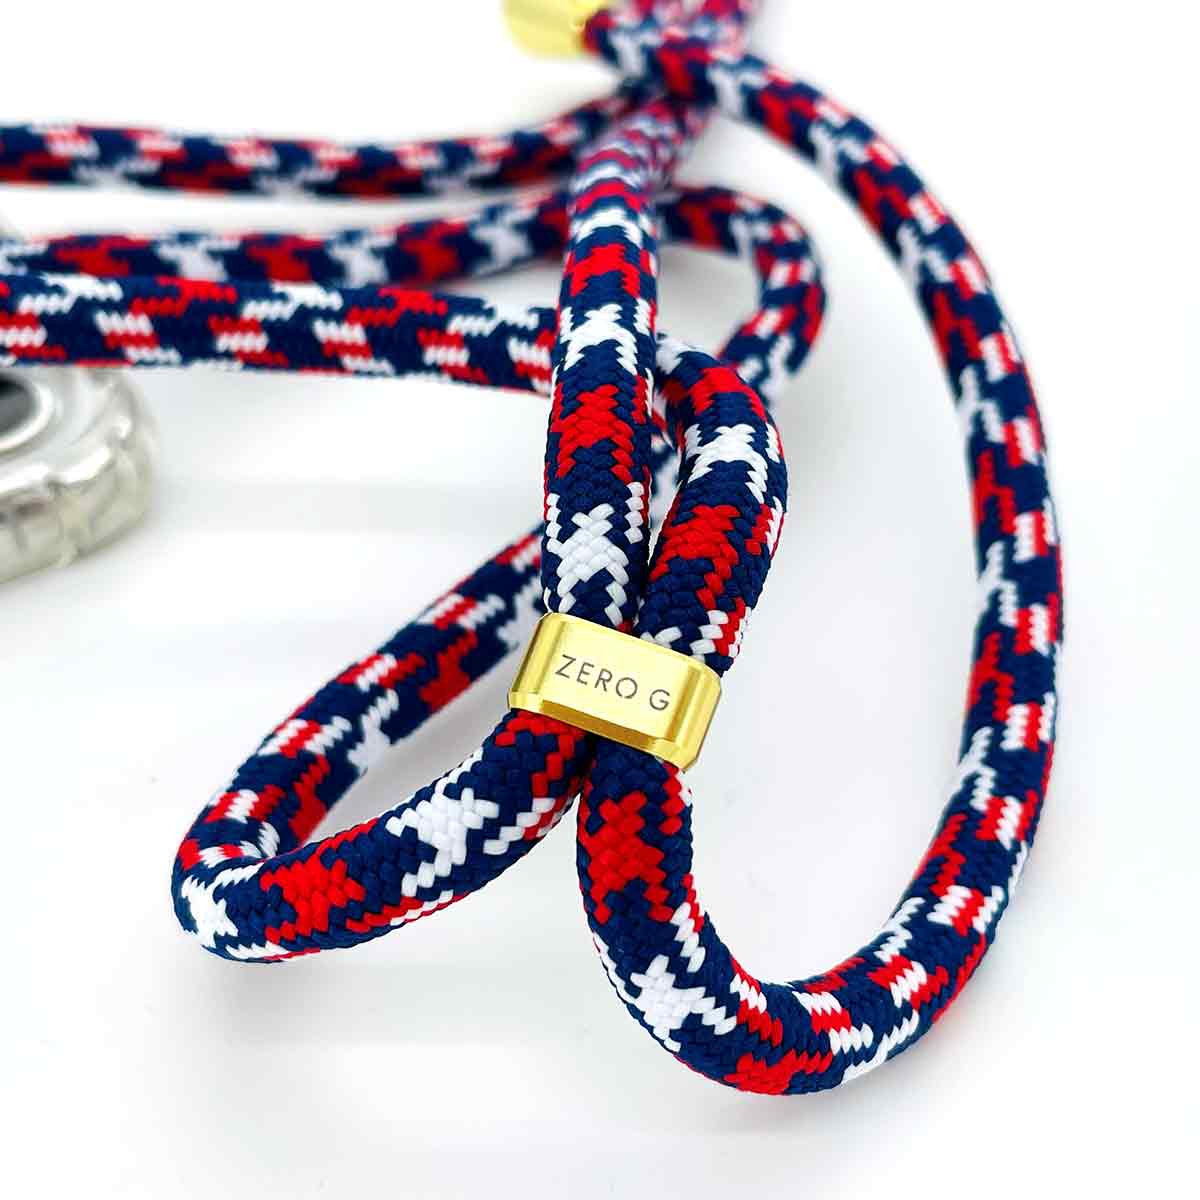 "Hanseatic" Phone Necklace for Samsung Galaxy S20 Ultra (blue/white/red)